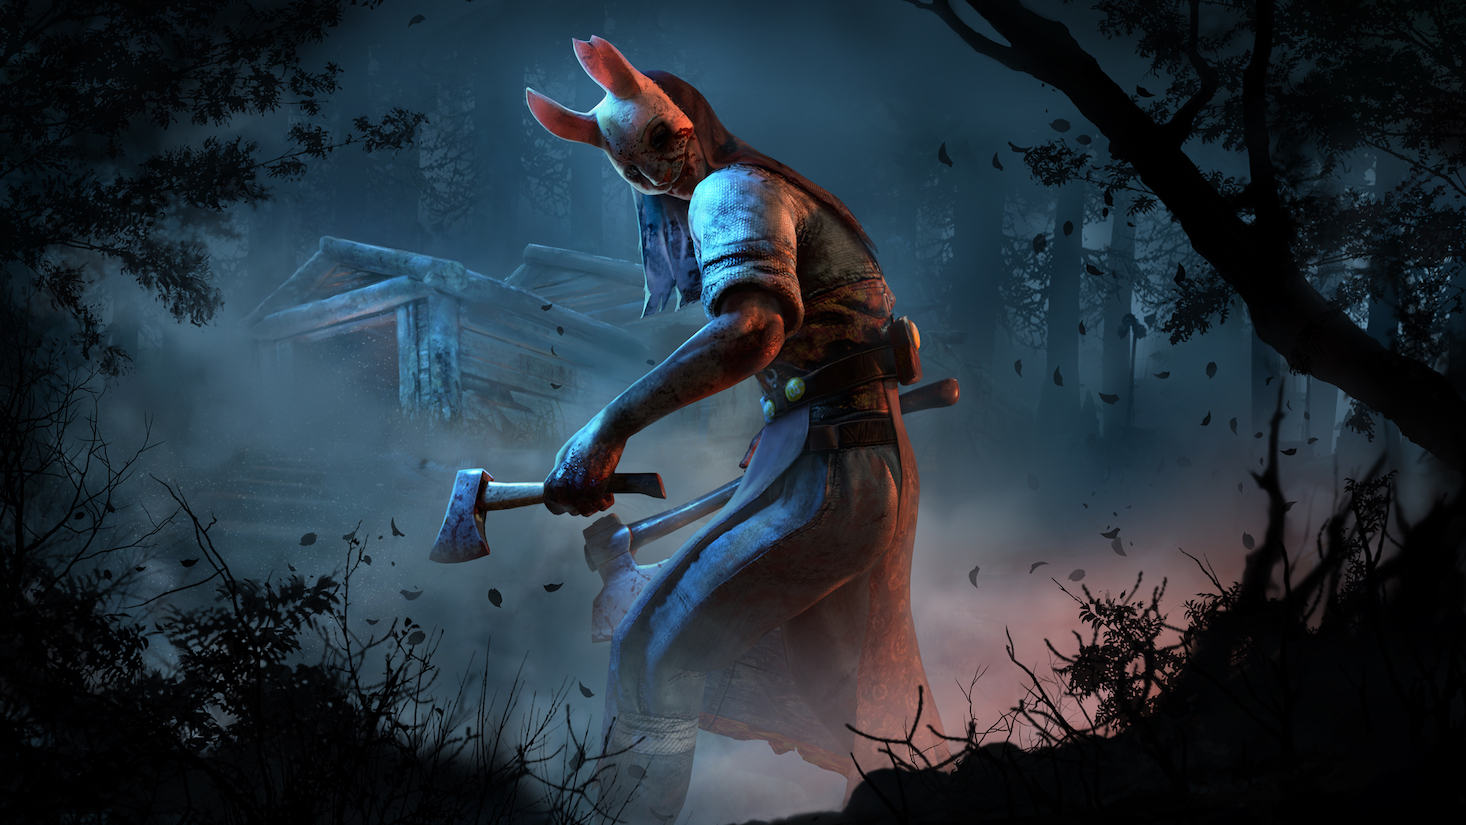 Dead by Daylight, A Multiplayer Action Survival Horror game